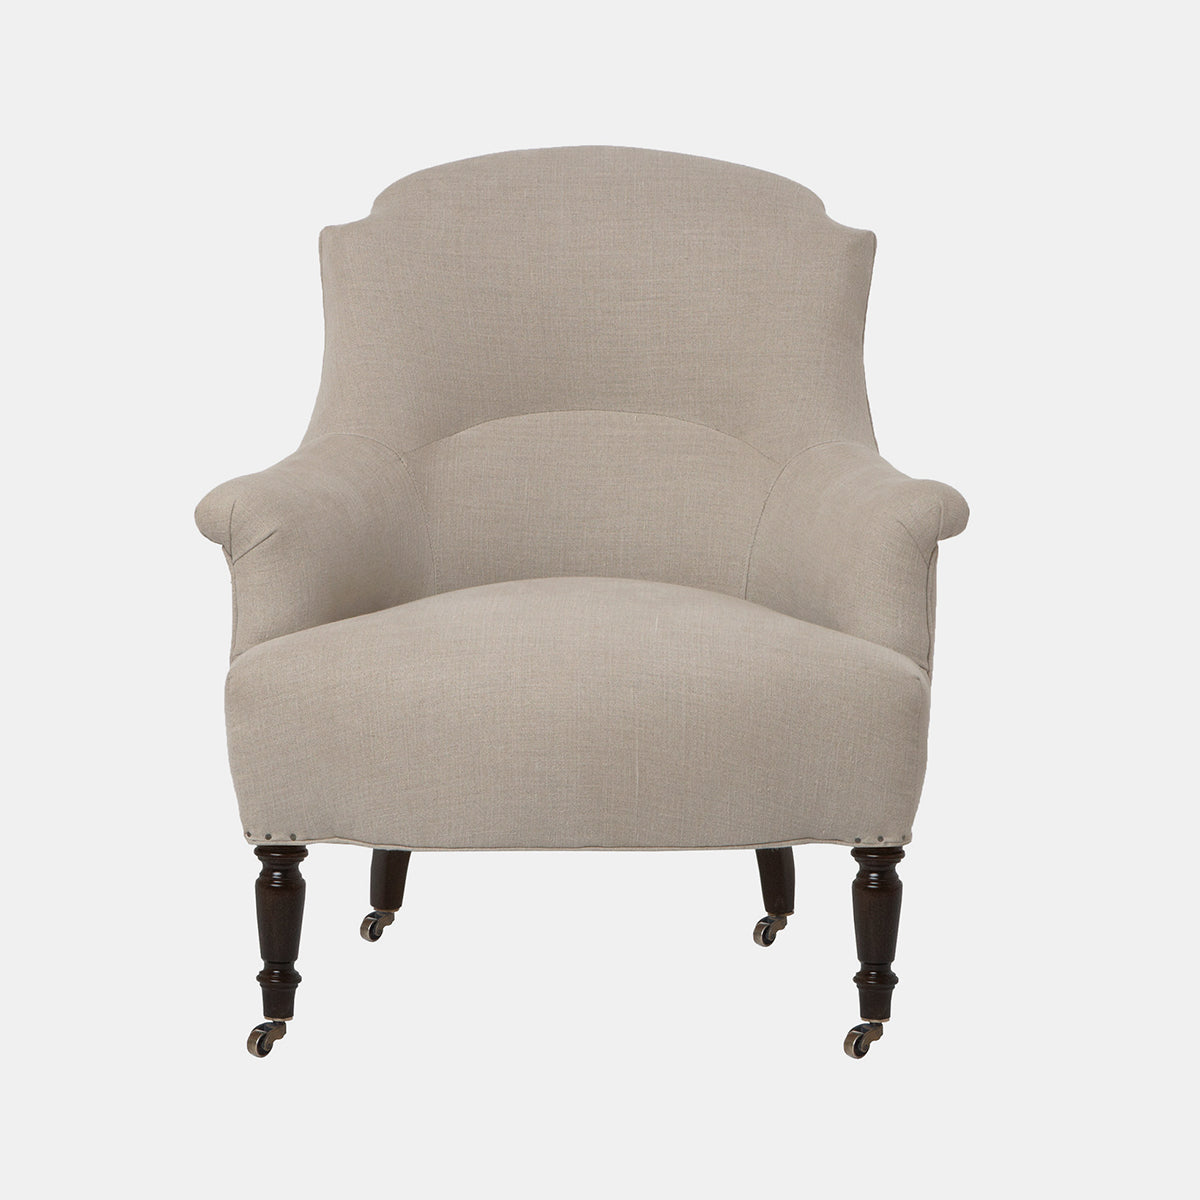 John Derian Tulip Chair in Vintage Flax 100% Linen in stock at Collyer's Mansion